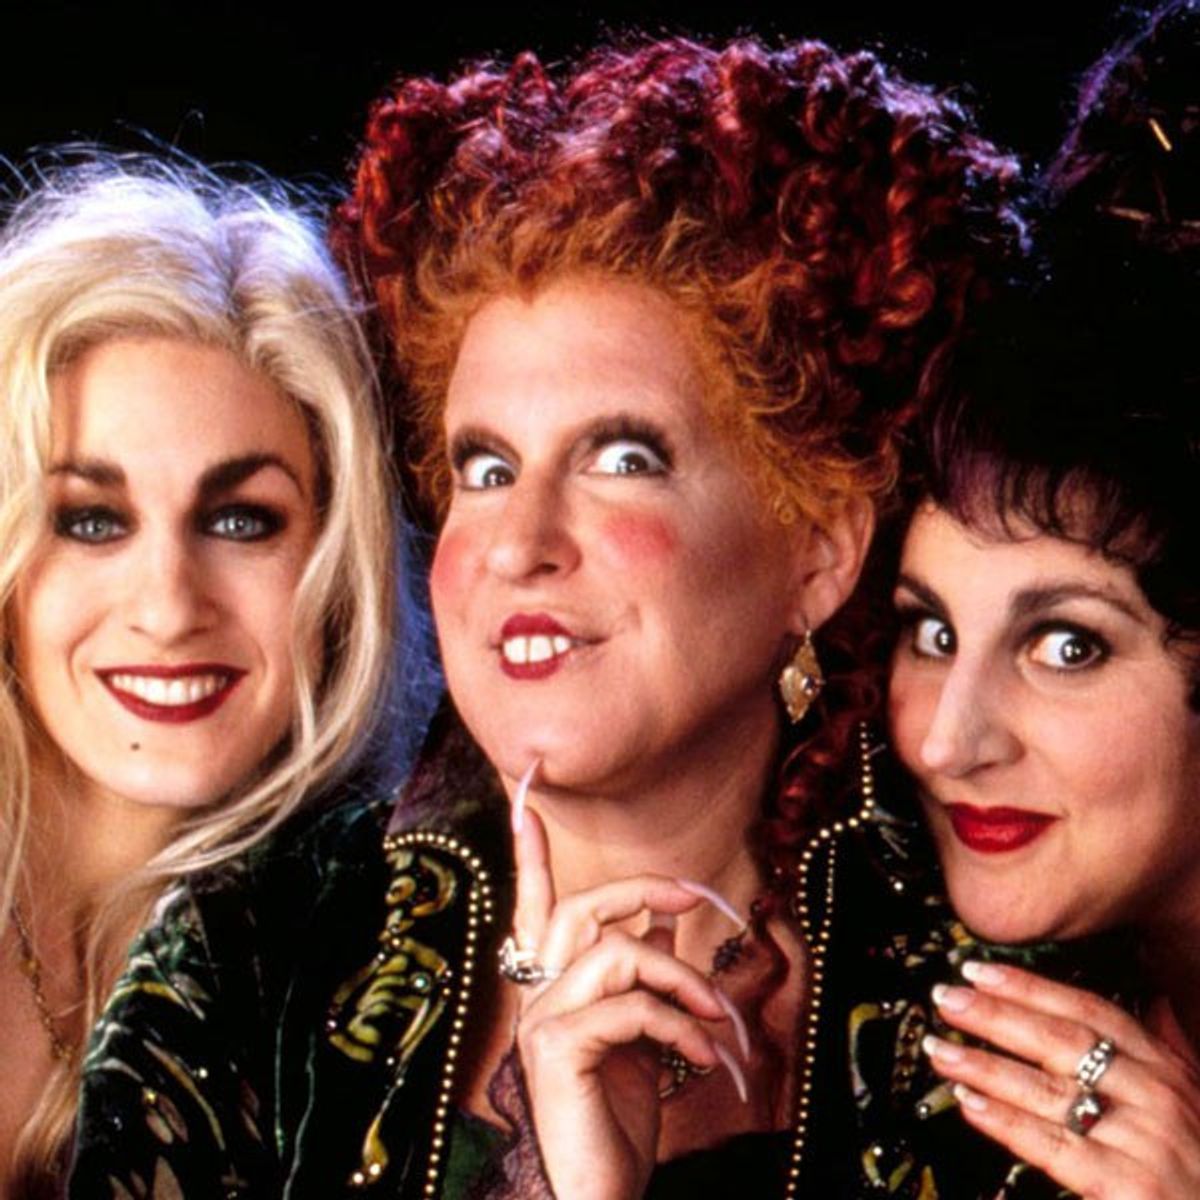 Why Everybody Should Watch the Movie "Hocus Pocus"